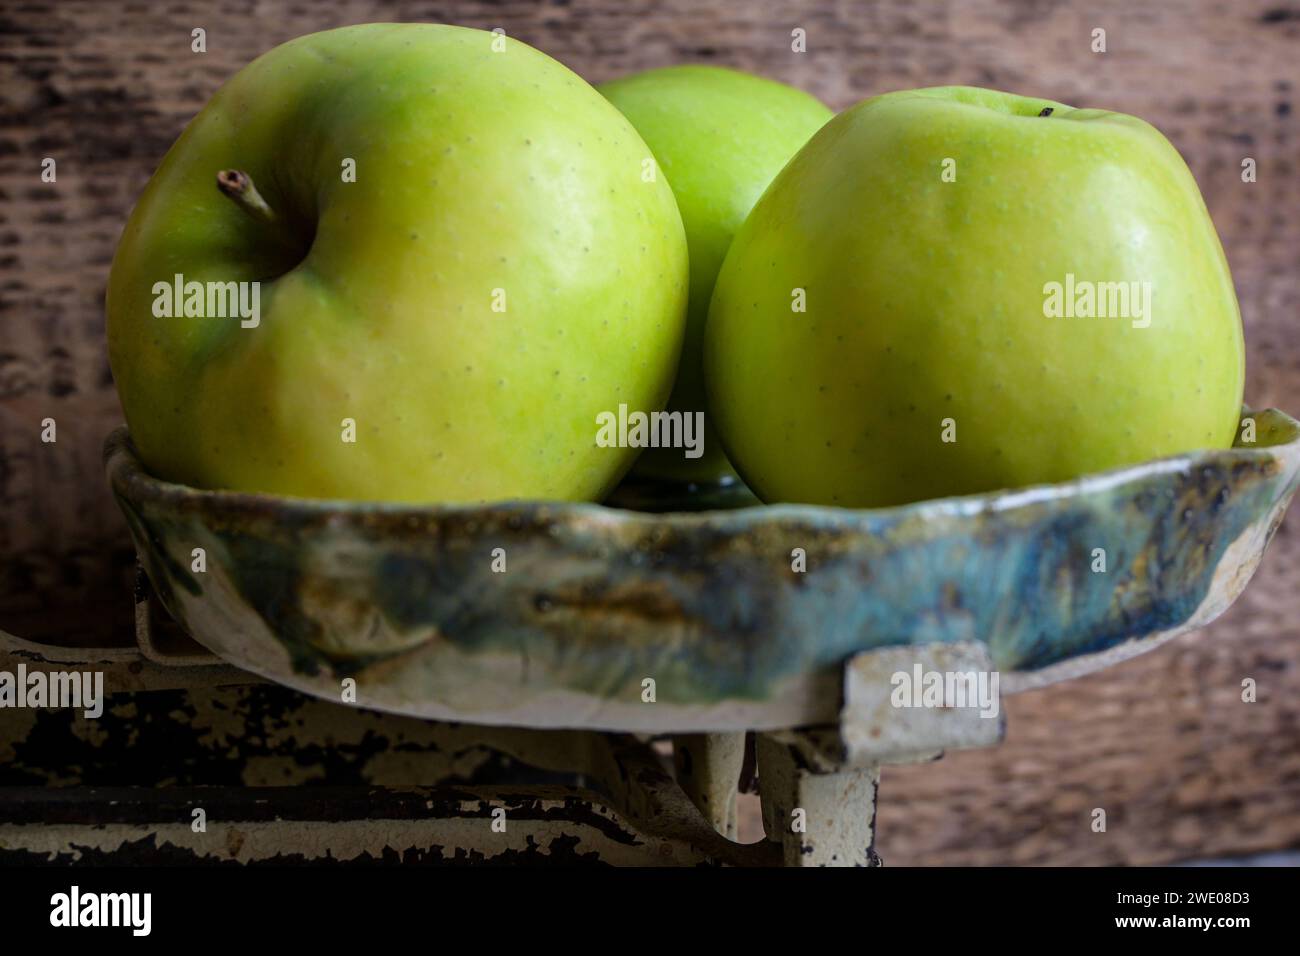 green and red apples on a scale and wooden background, retro style - side view. Stock Photo